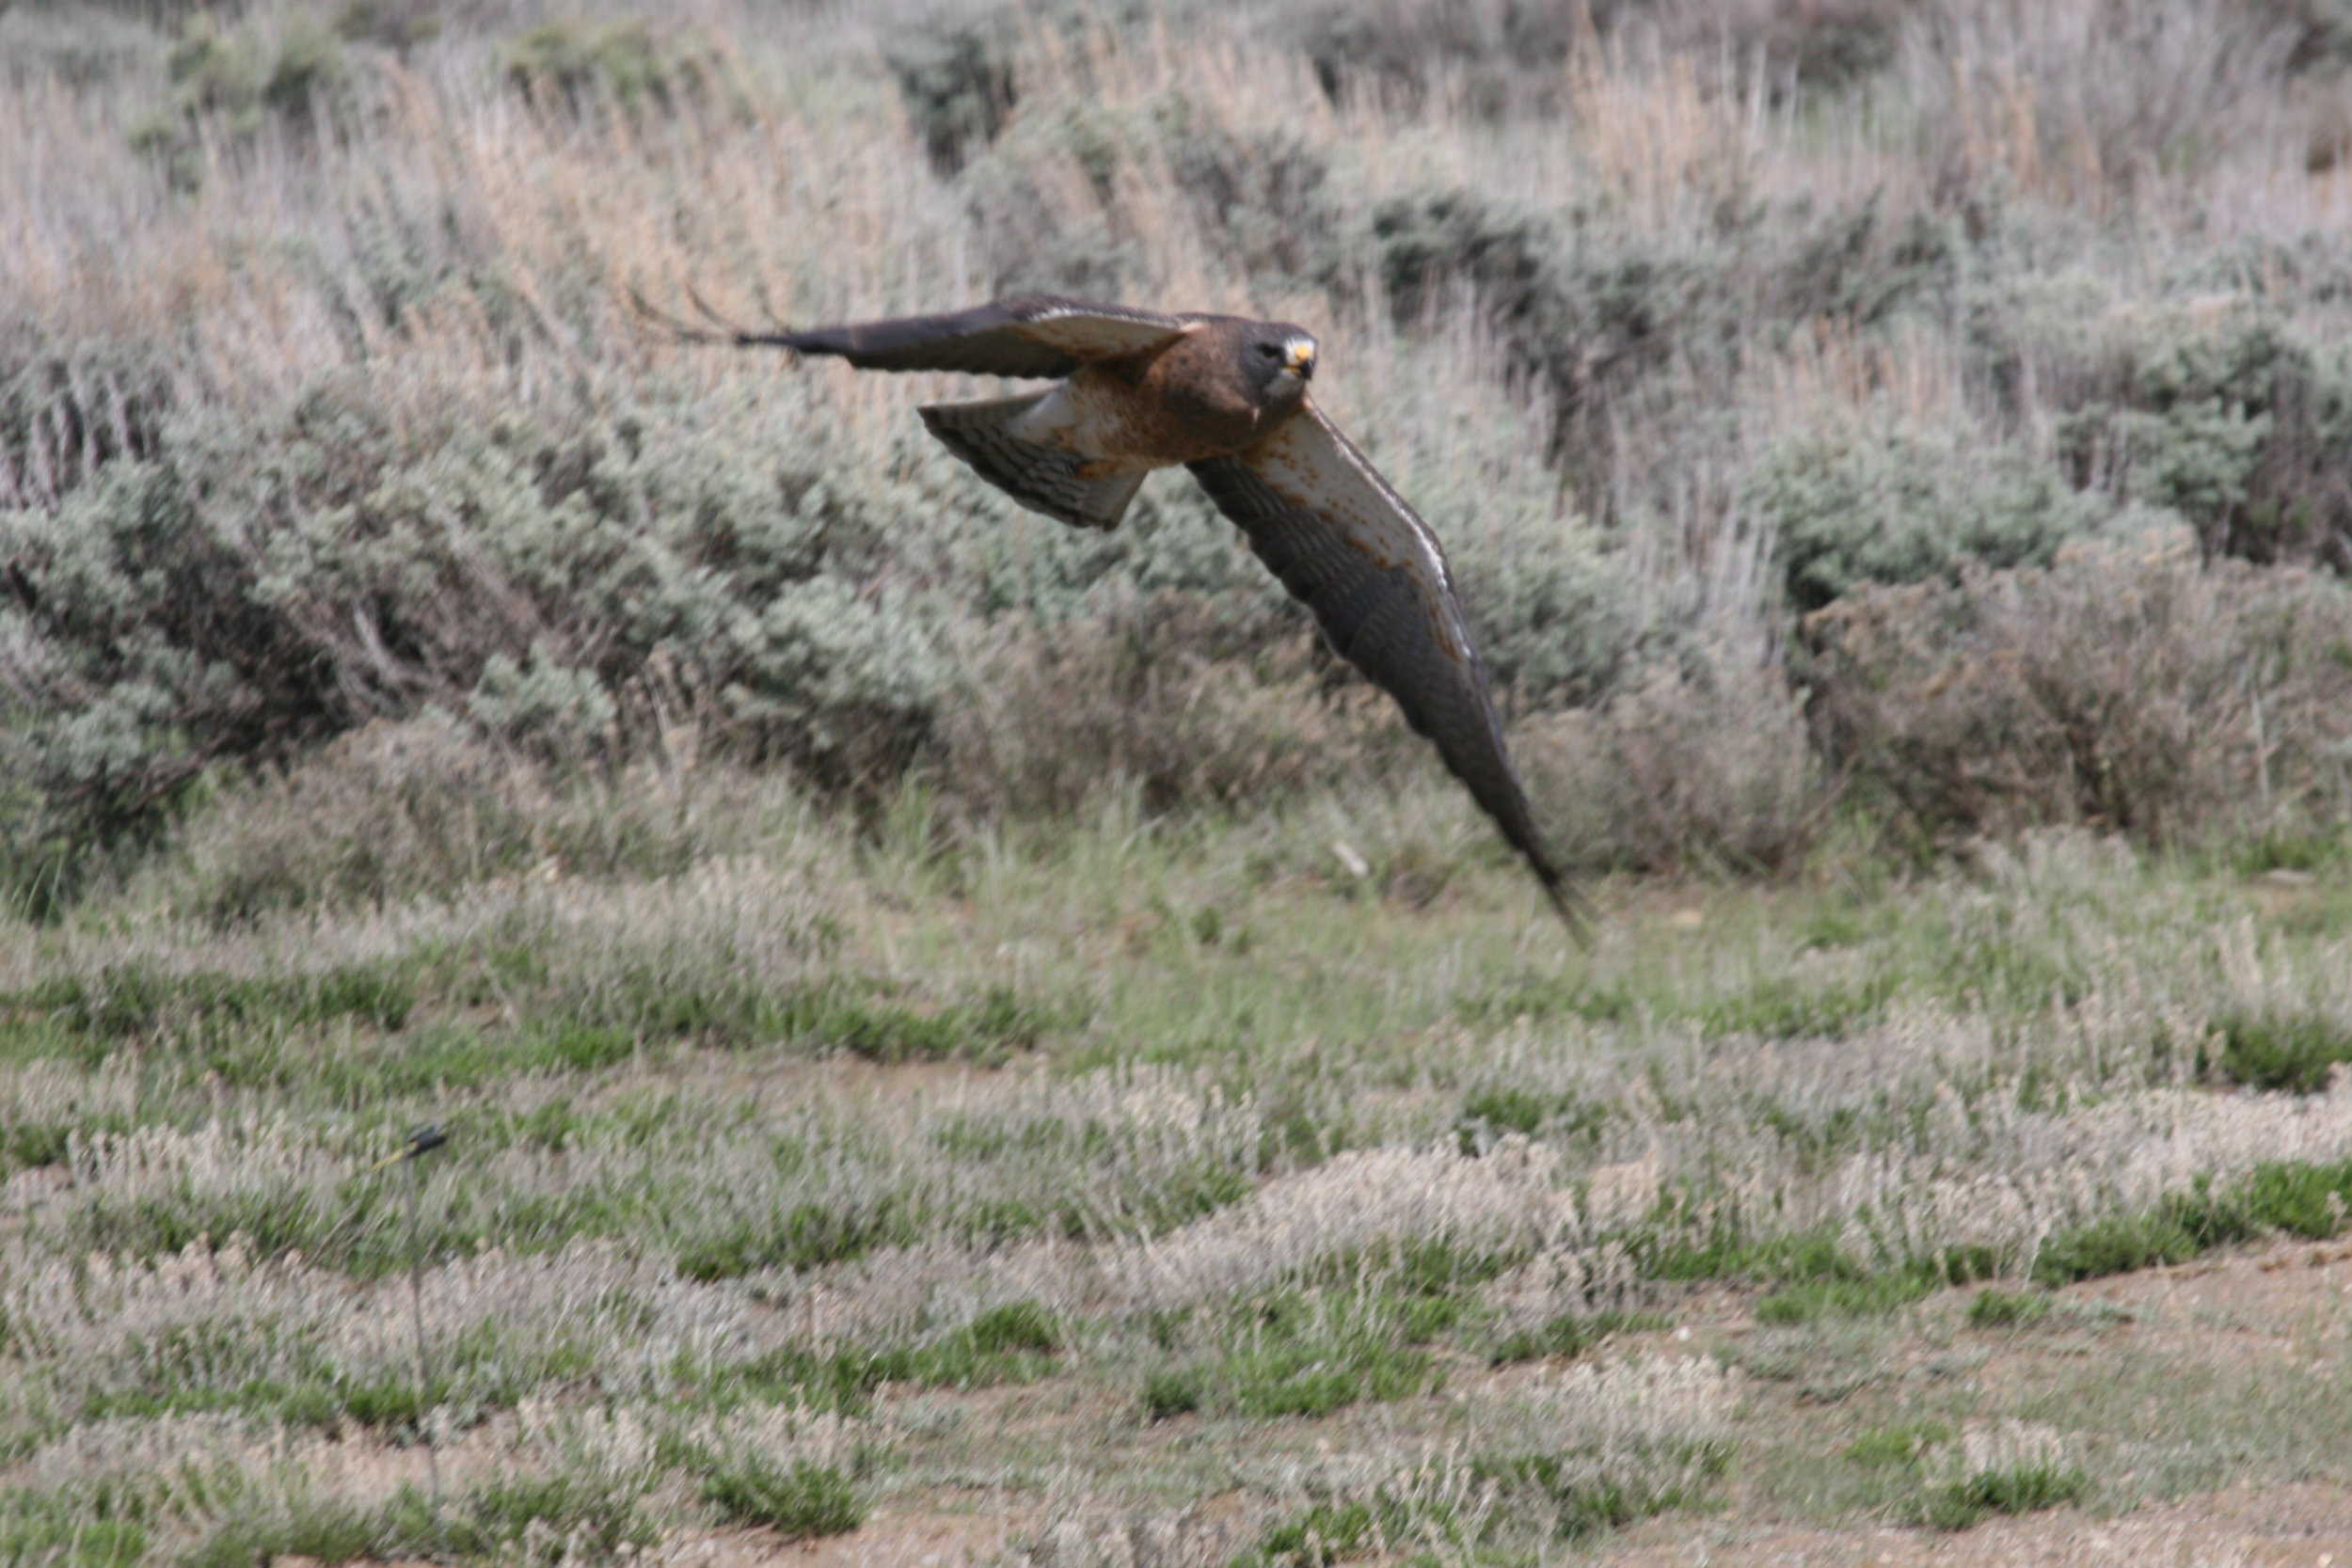  A Swainson's hawk flies over the colony looking for juvenile prairie dogs.  ©John Hoogland 2011  